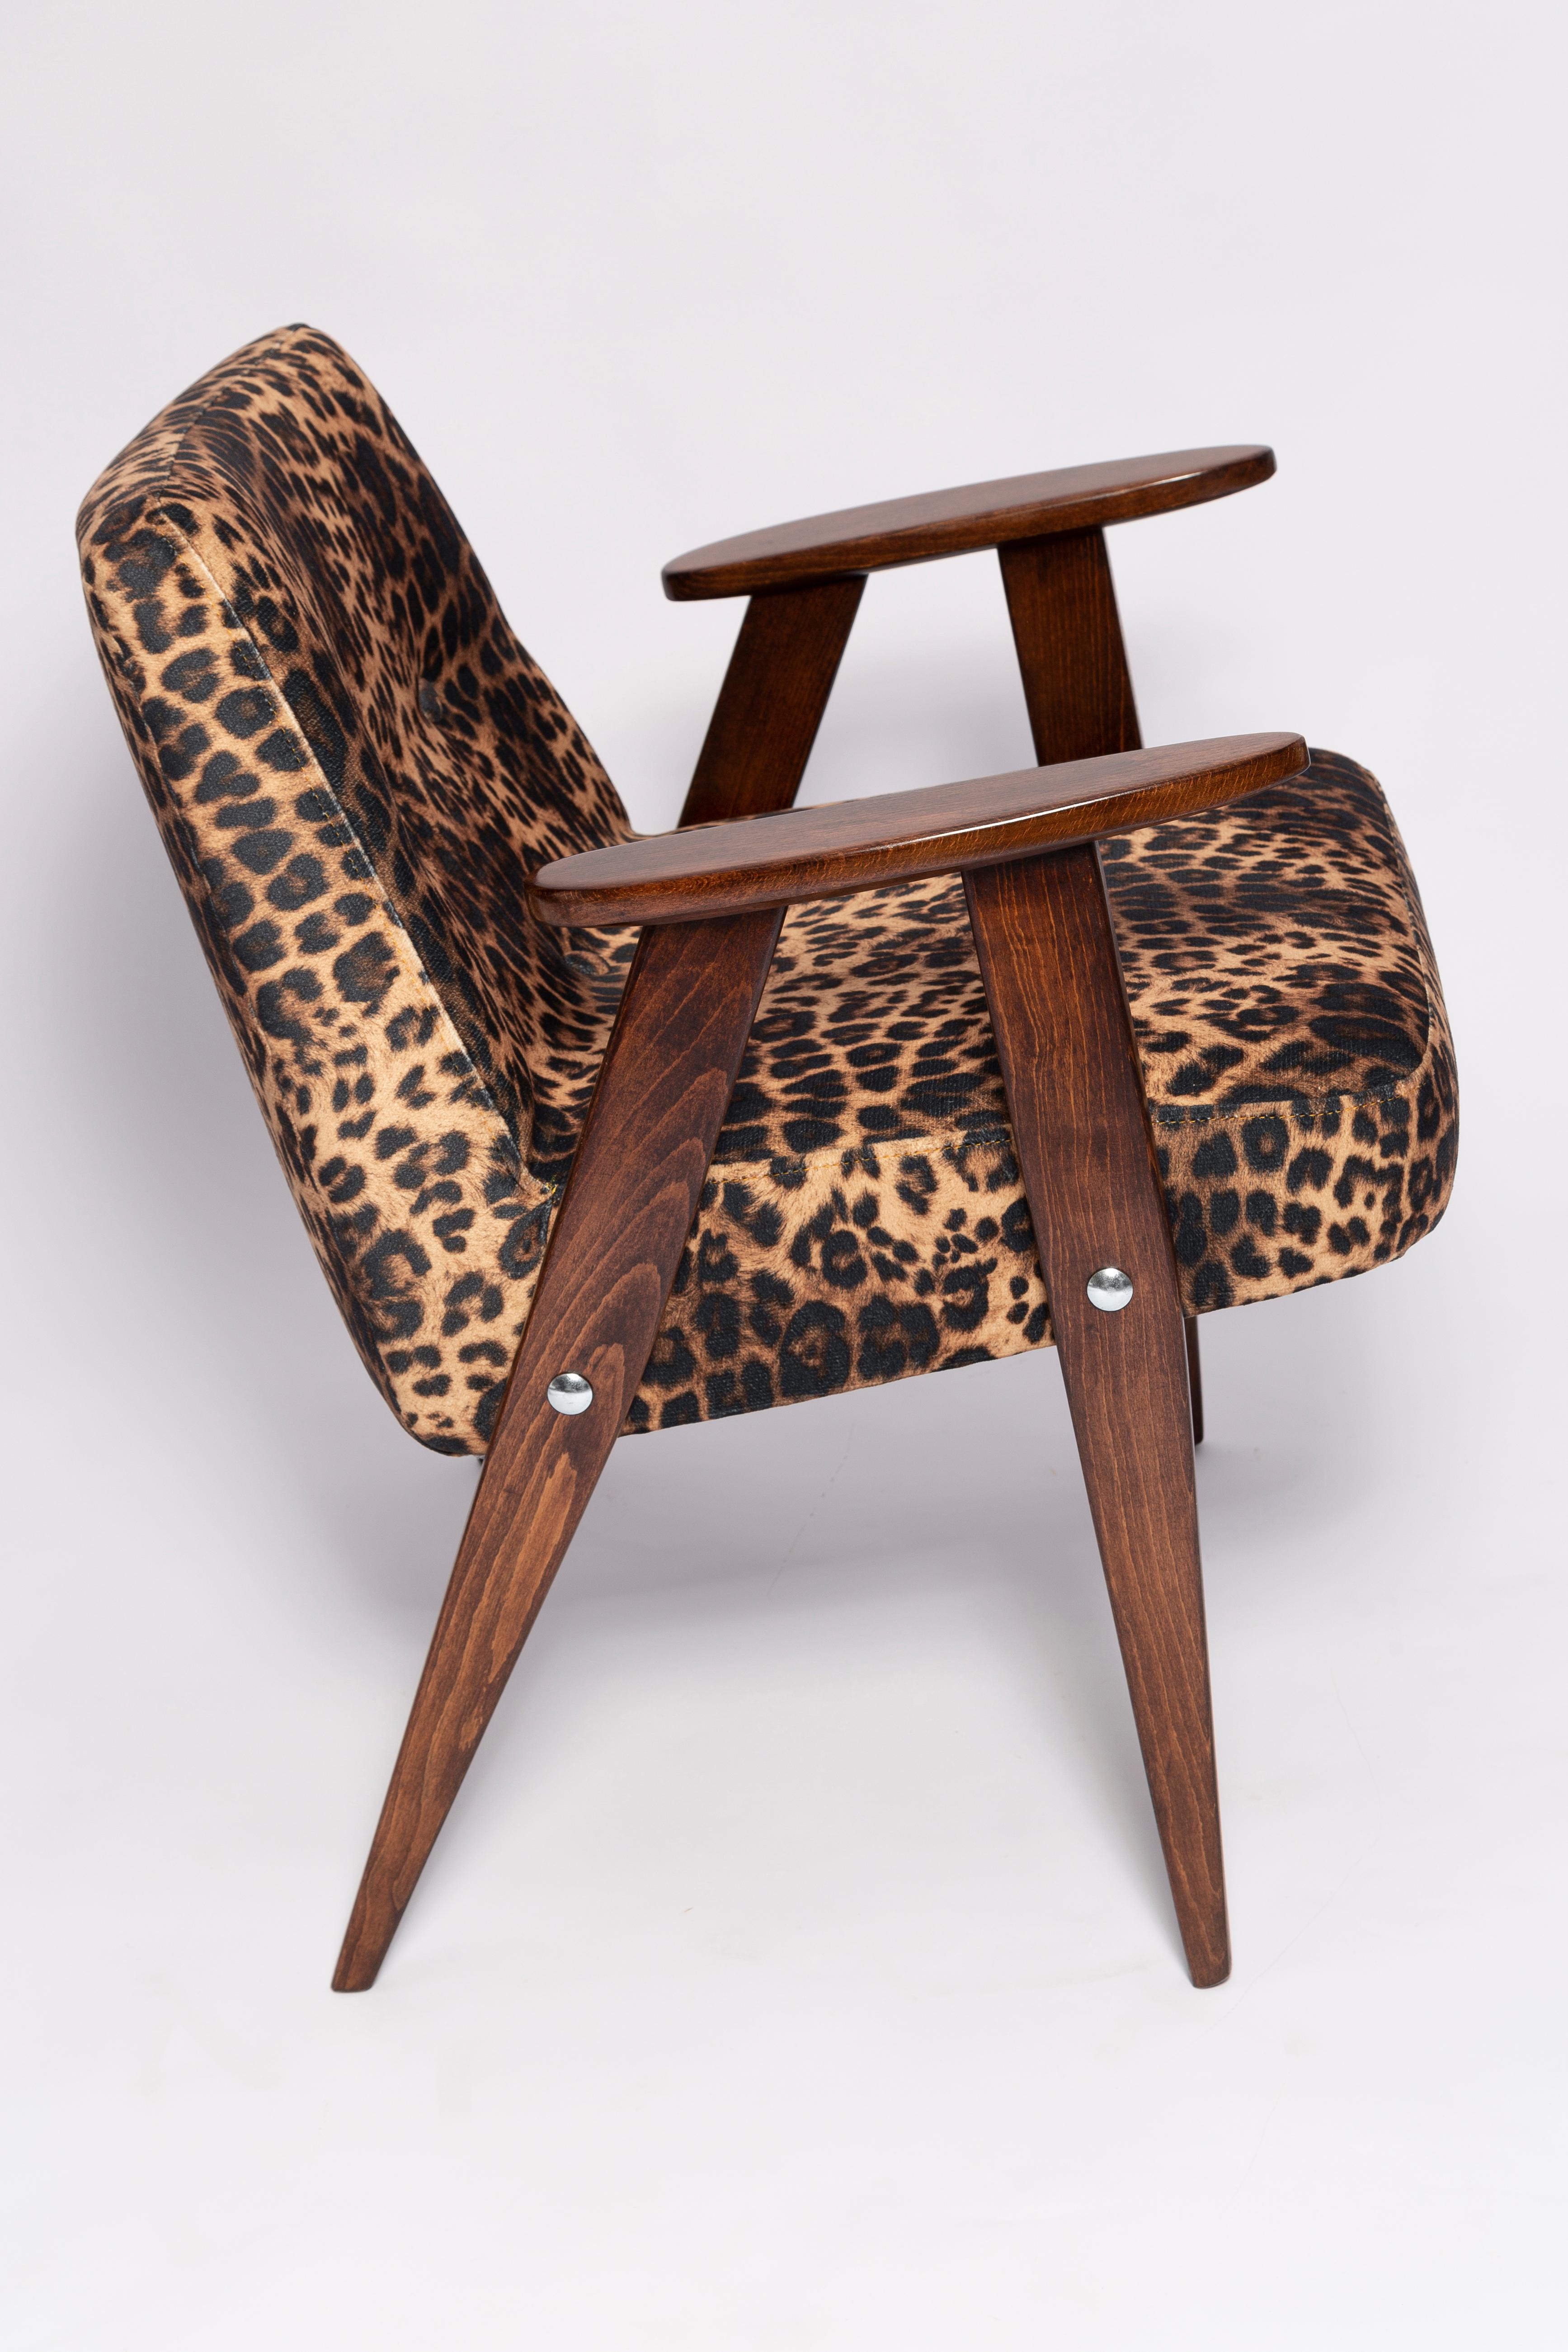 Two Midcentury 366 Armchairs in Leopard Print Velvet, Jozef Chierowski, 1960s For Sale 1